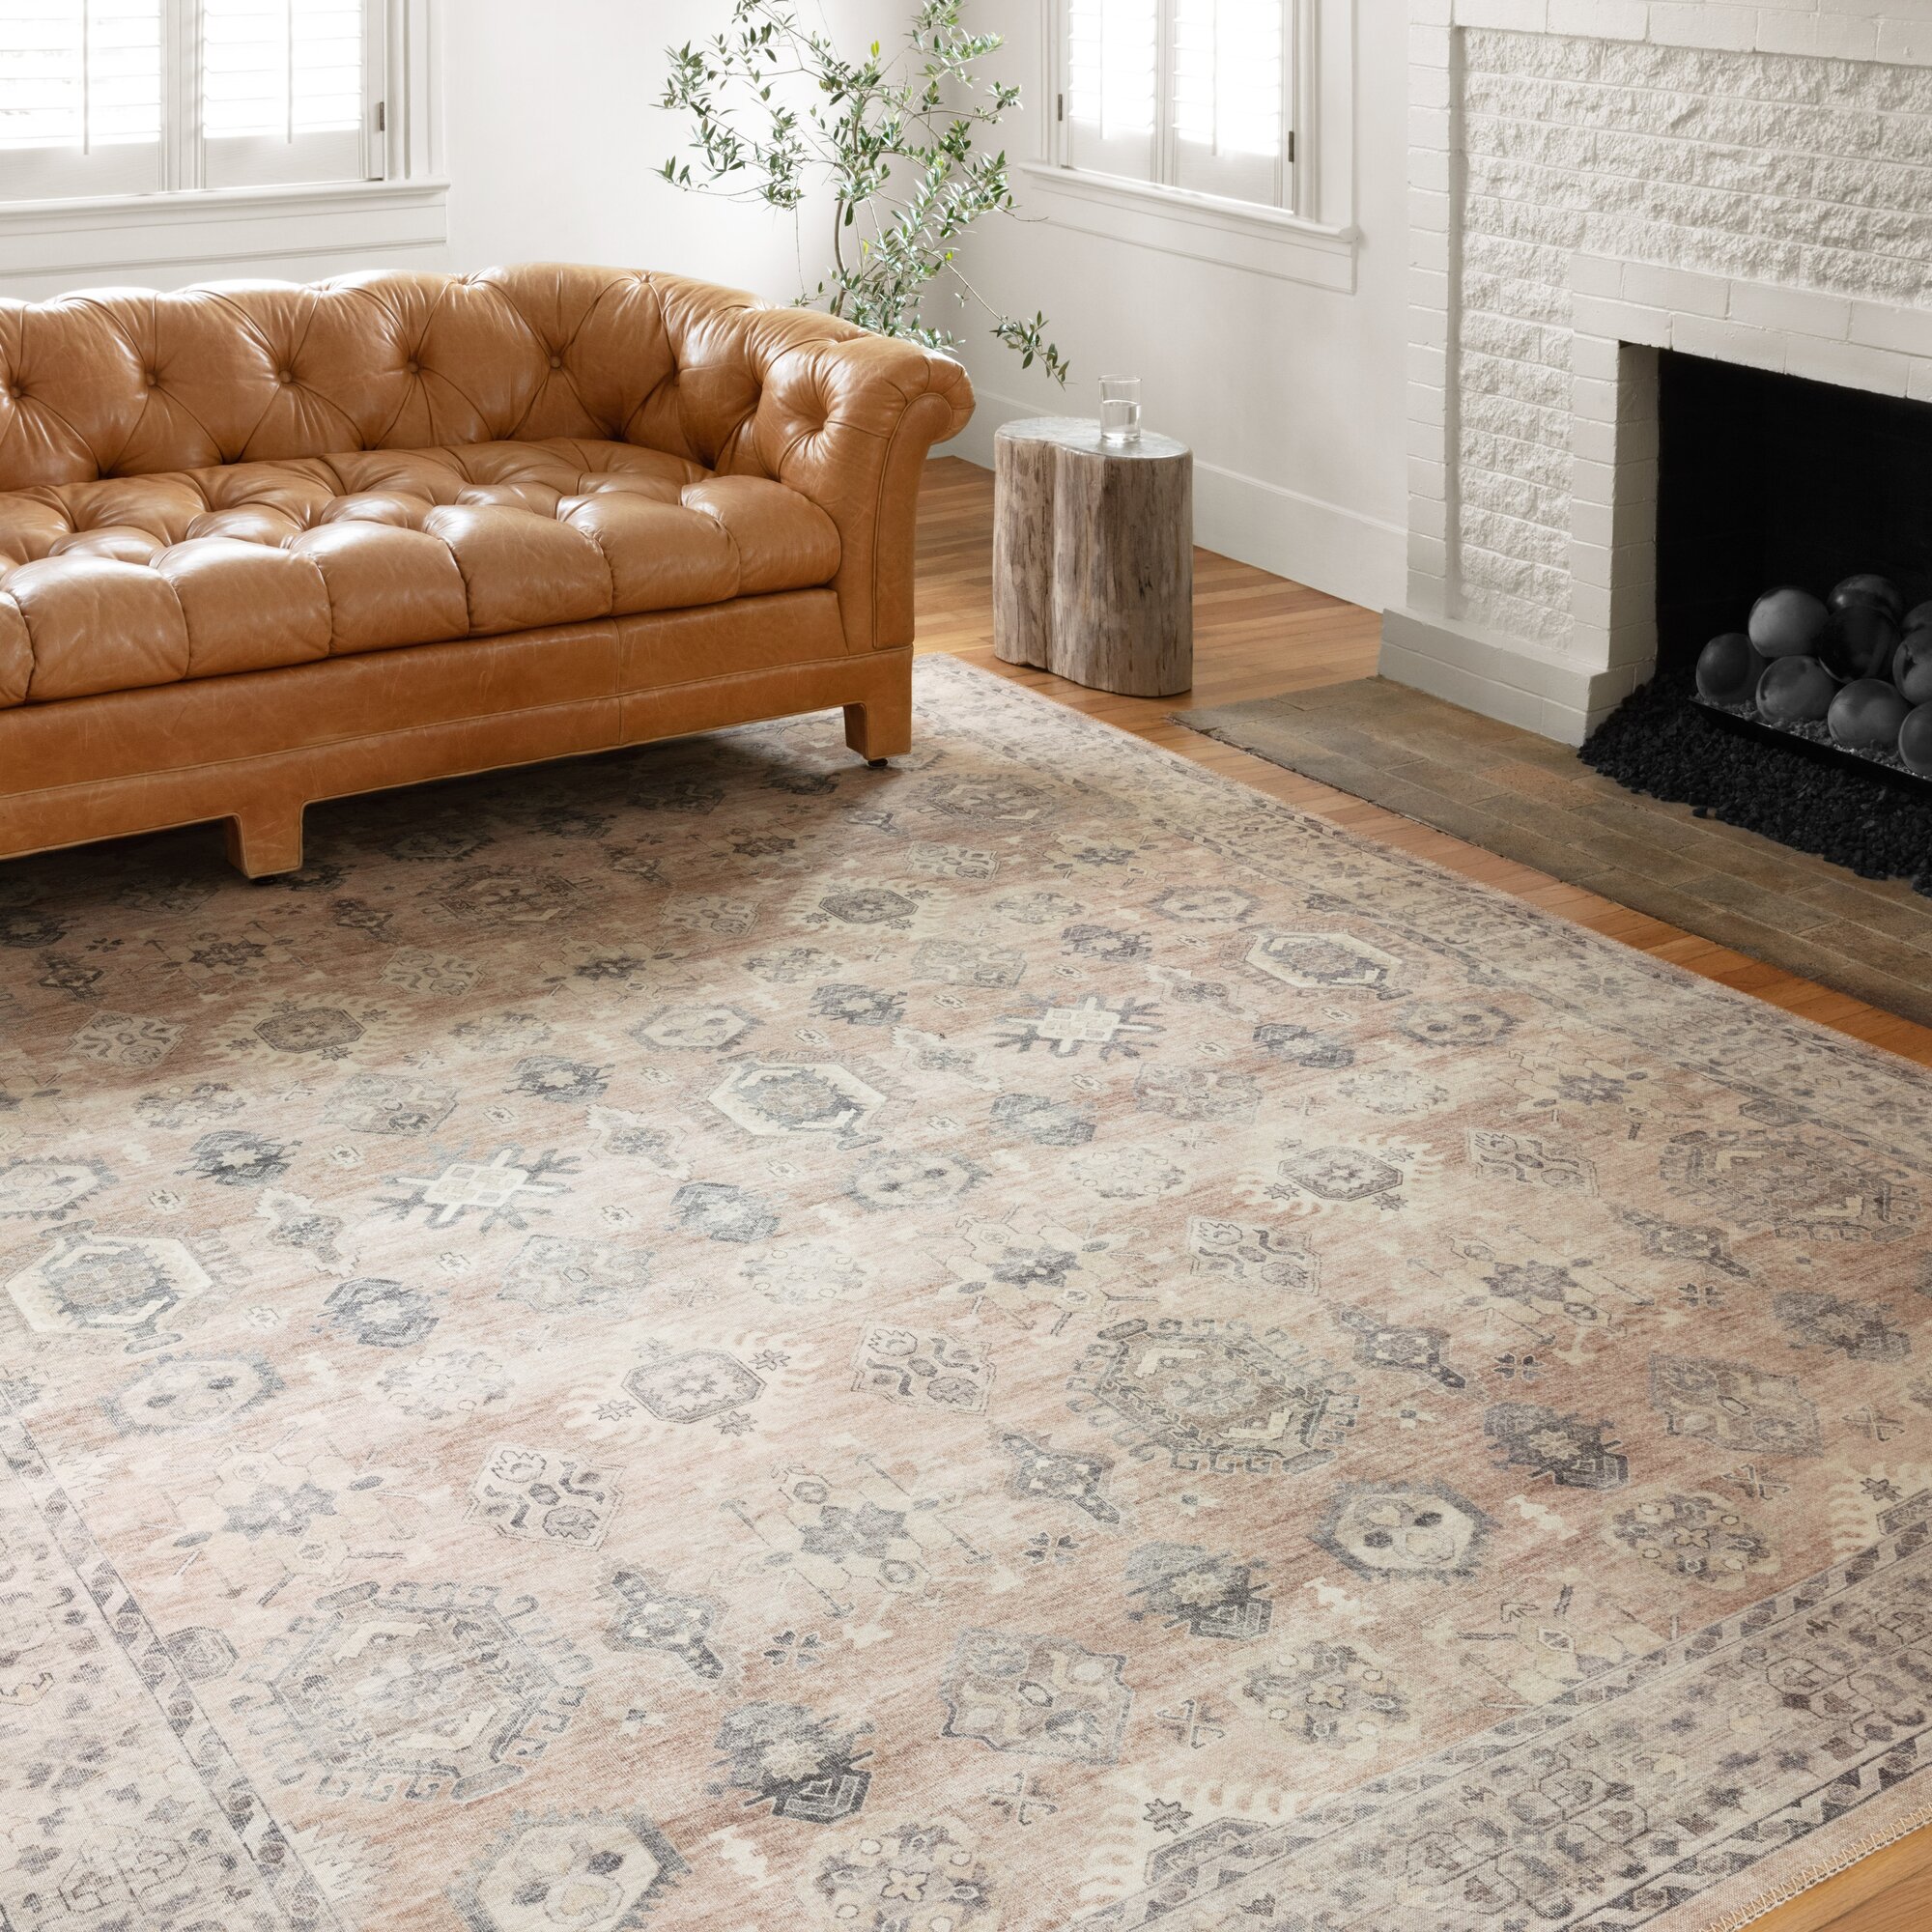 Oriental Ivory, Beige, and Grey Area Rug